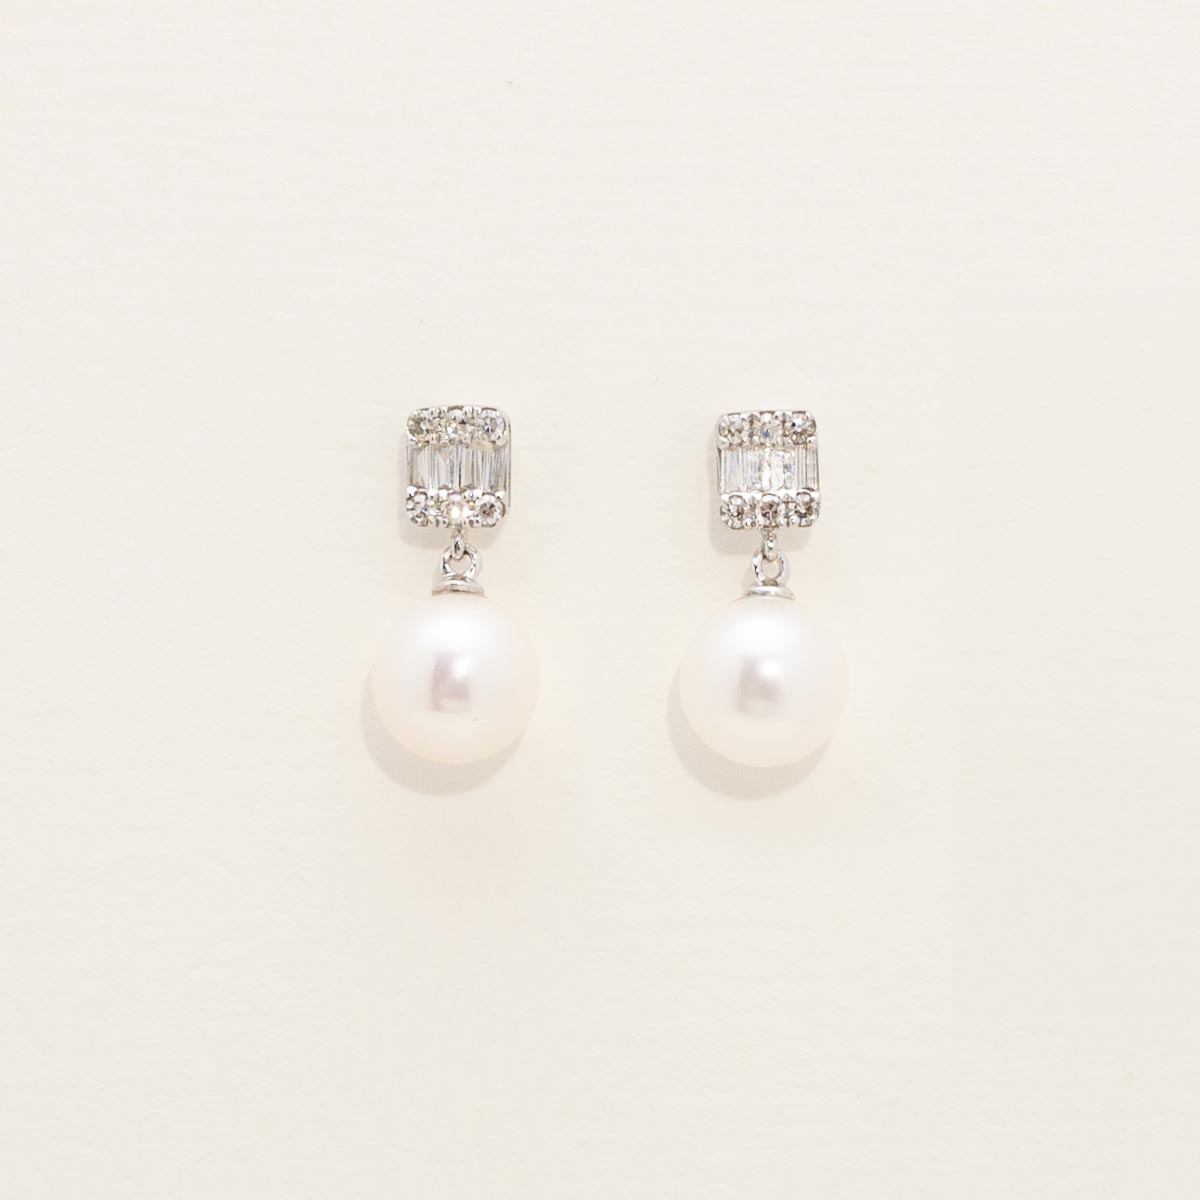 Cultured Freshwater Pearl Drop Earring in 14kt White Gold with Diamonds (1/10ct tw and 6mm pearls)